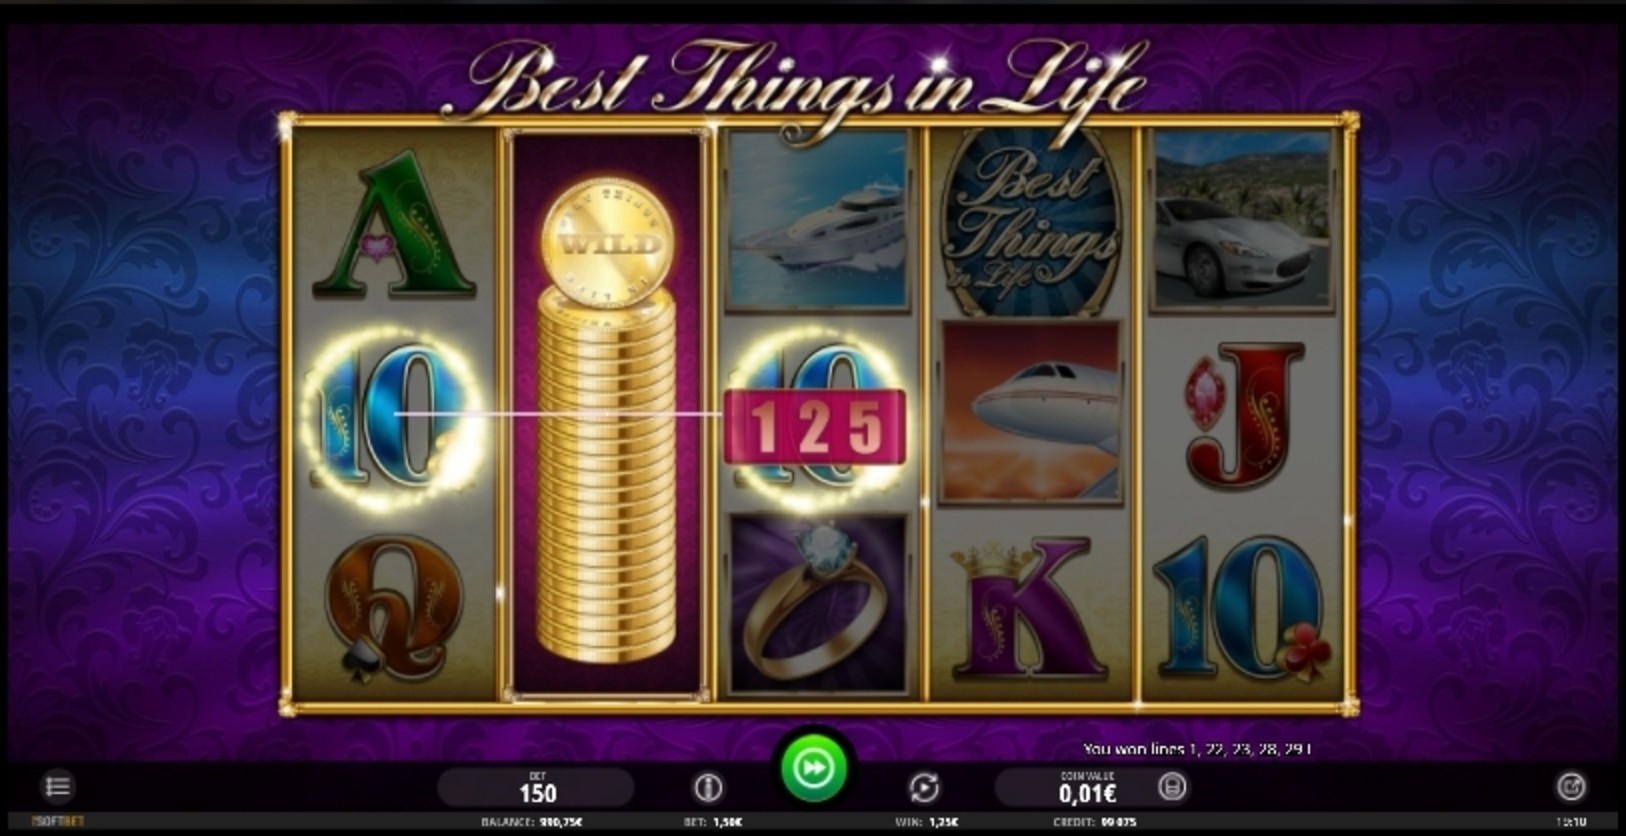 Win Money in Best Things in Life Free Slot Game by iSoftBet